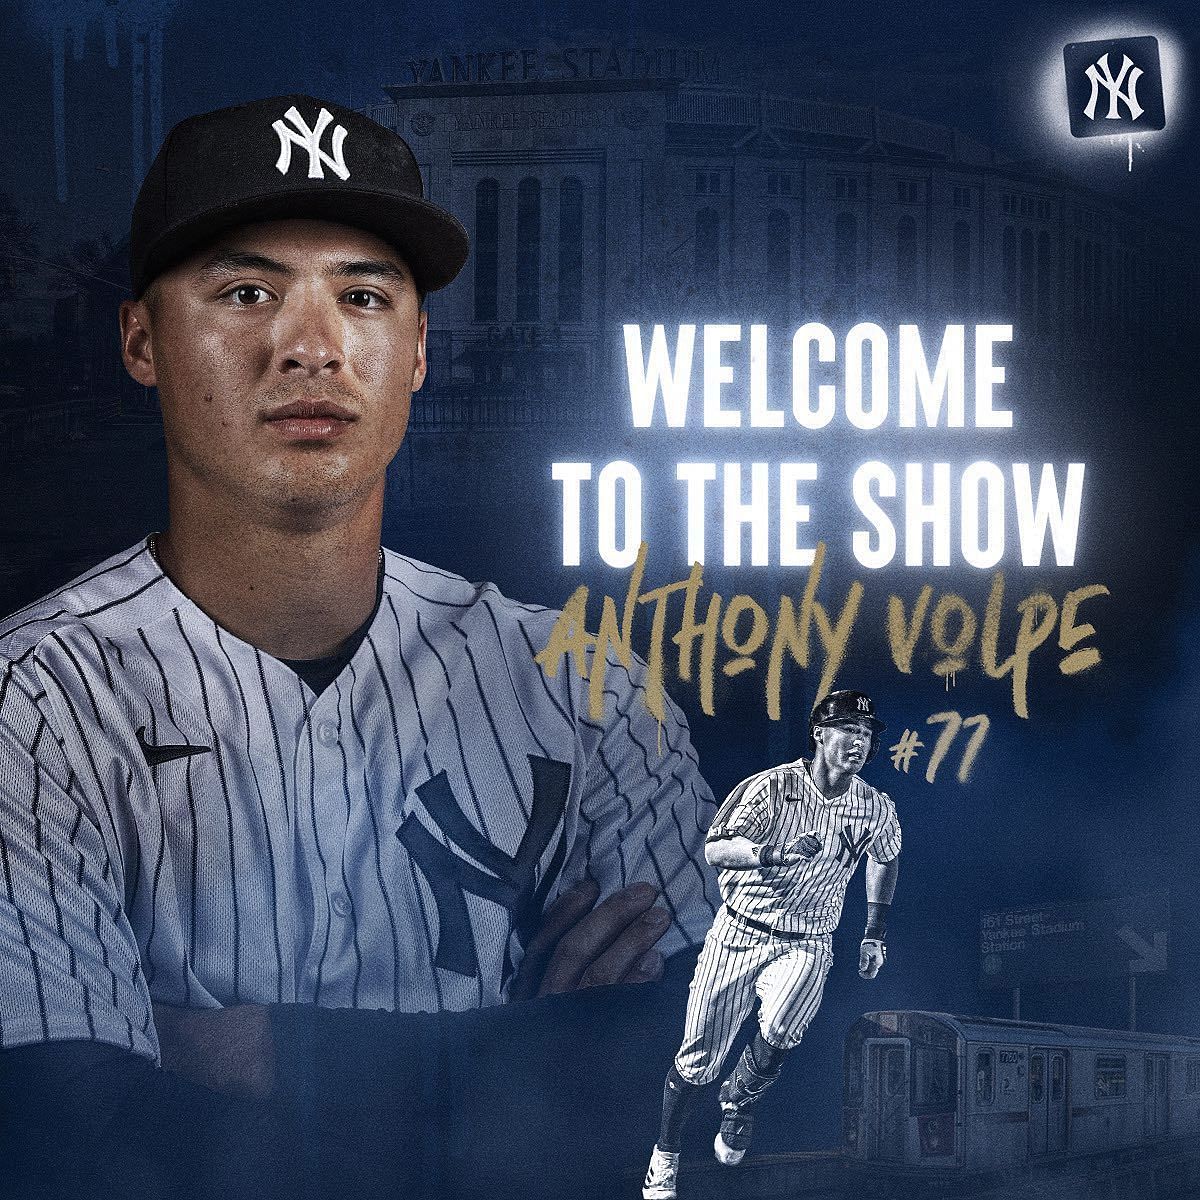 Anthony Volpe Jersey: Where to buy Anthony Volpe's New York Yankees jersey?  Best price and other details